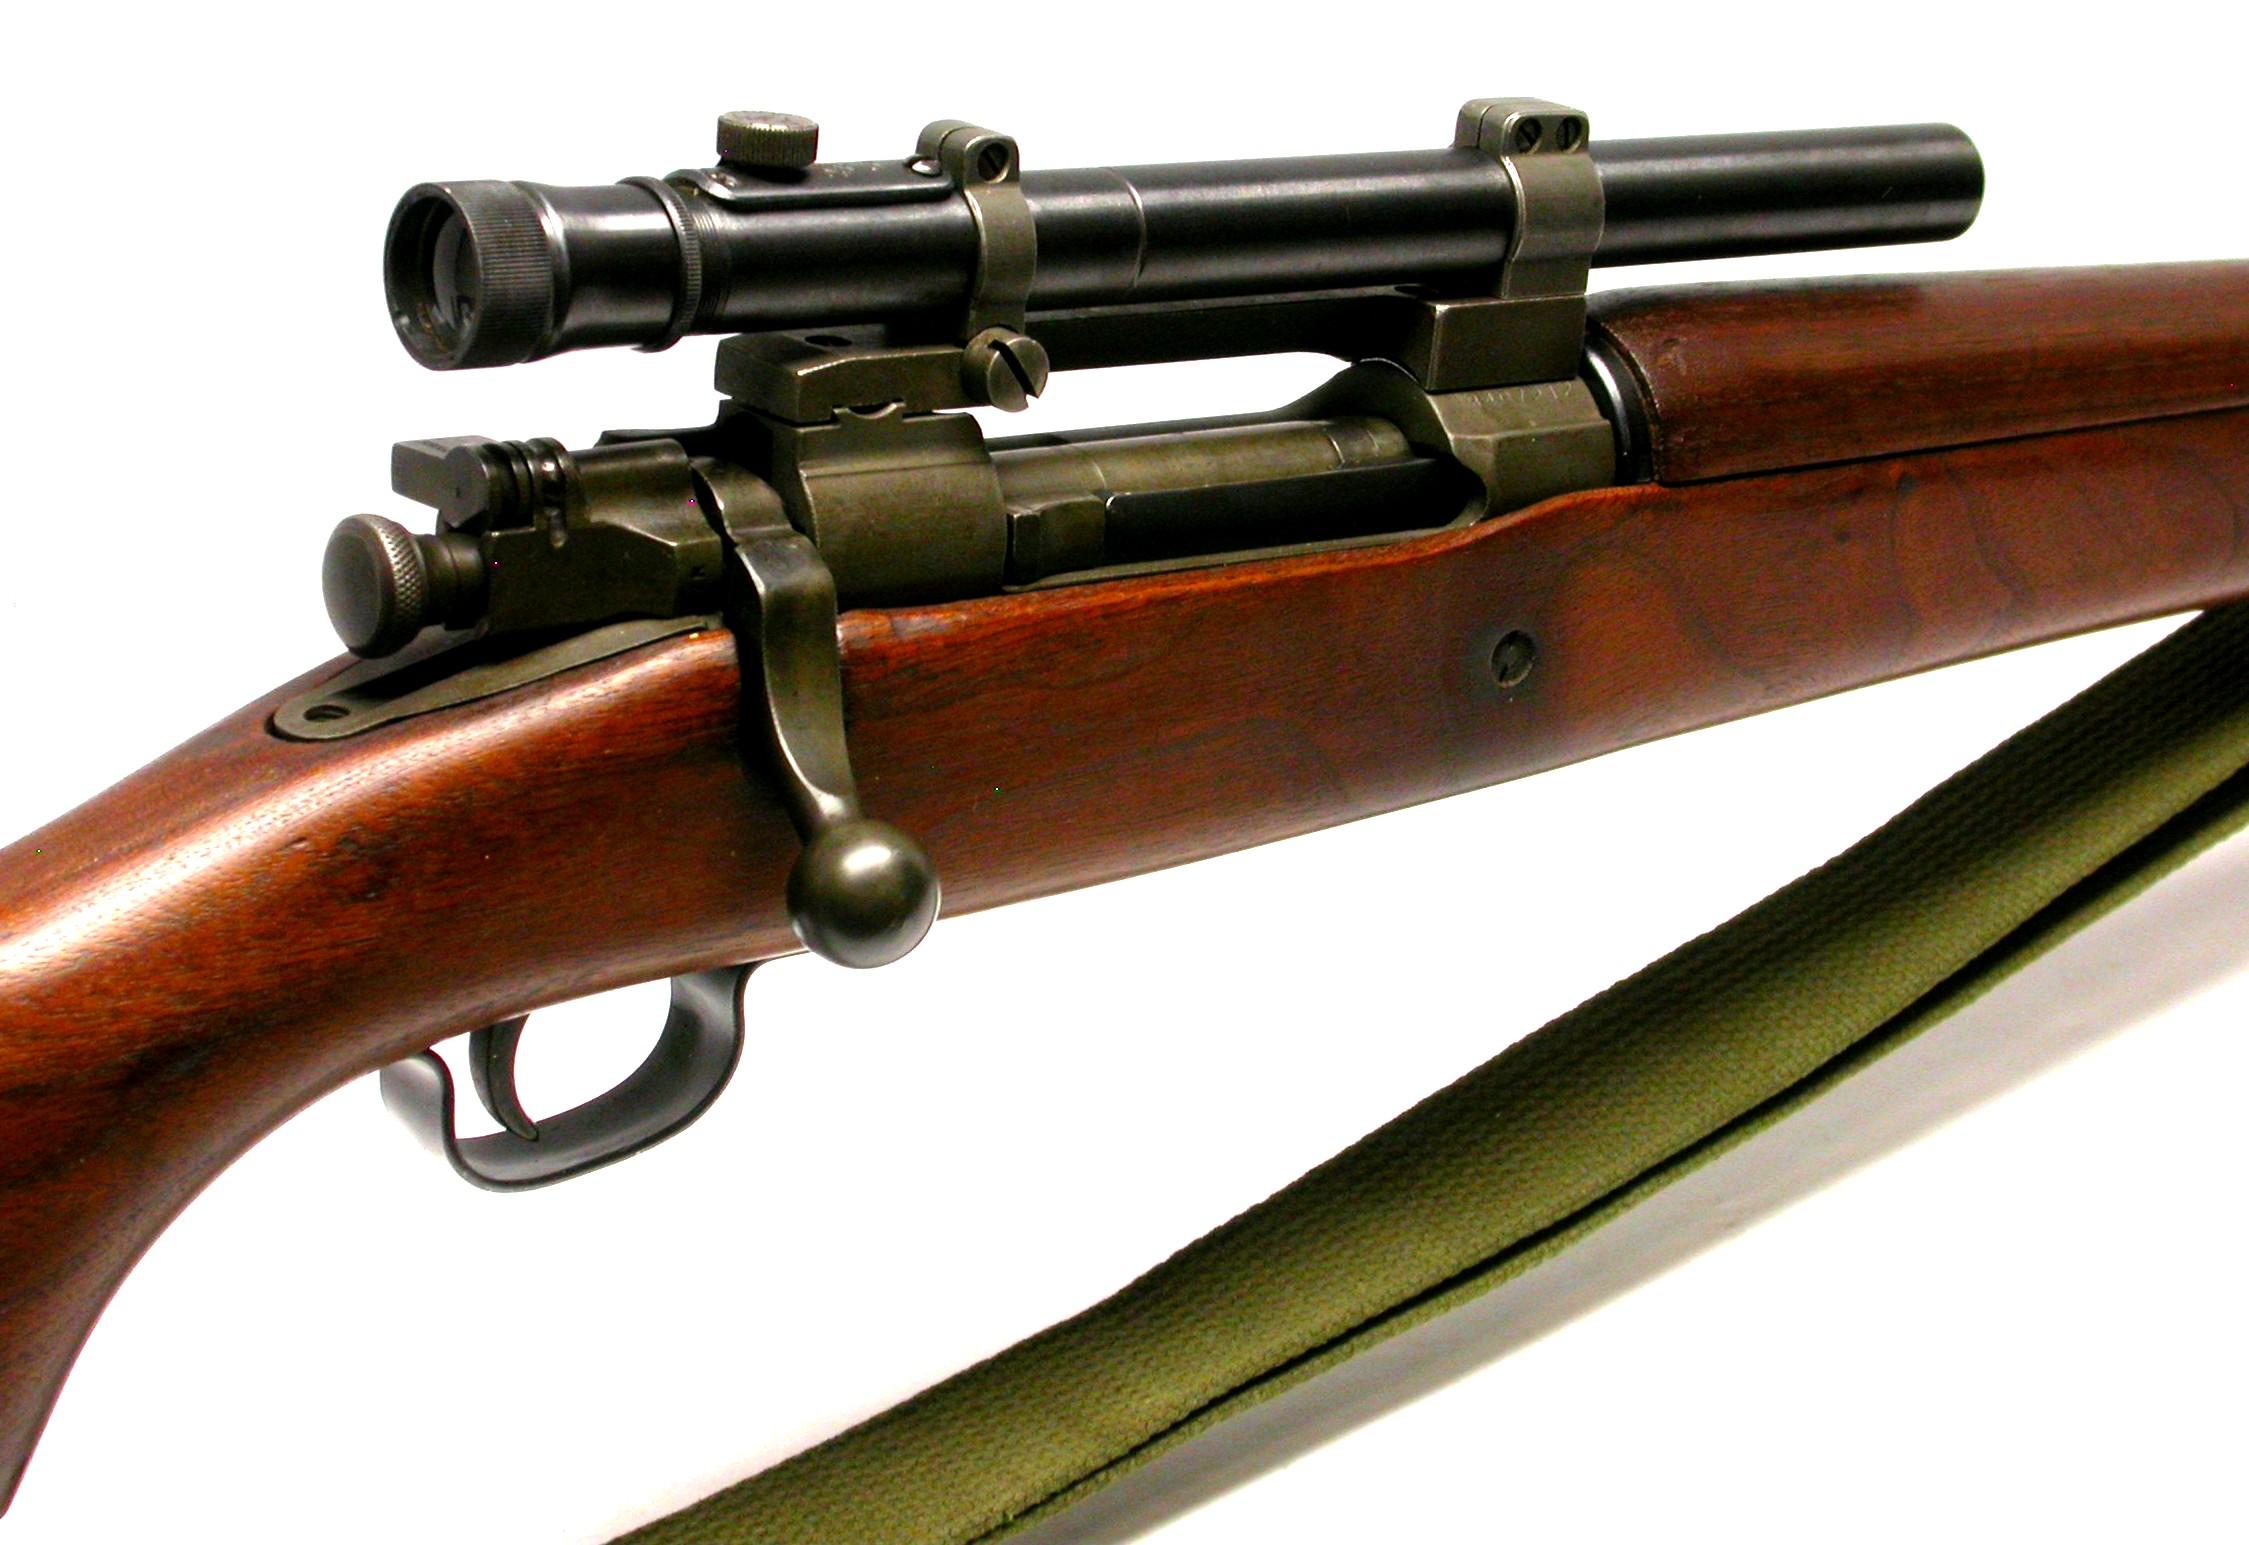 US Military WWII Remington M1903/A4 30-06 Bolt-Action Sniper Rifle - FFL # 3407212 (RLR1)